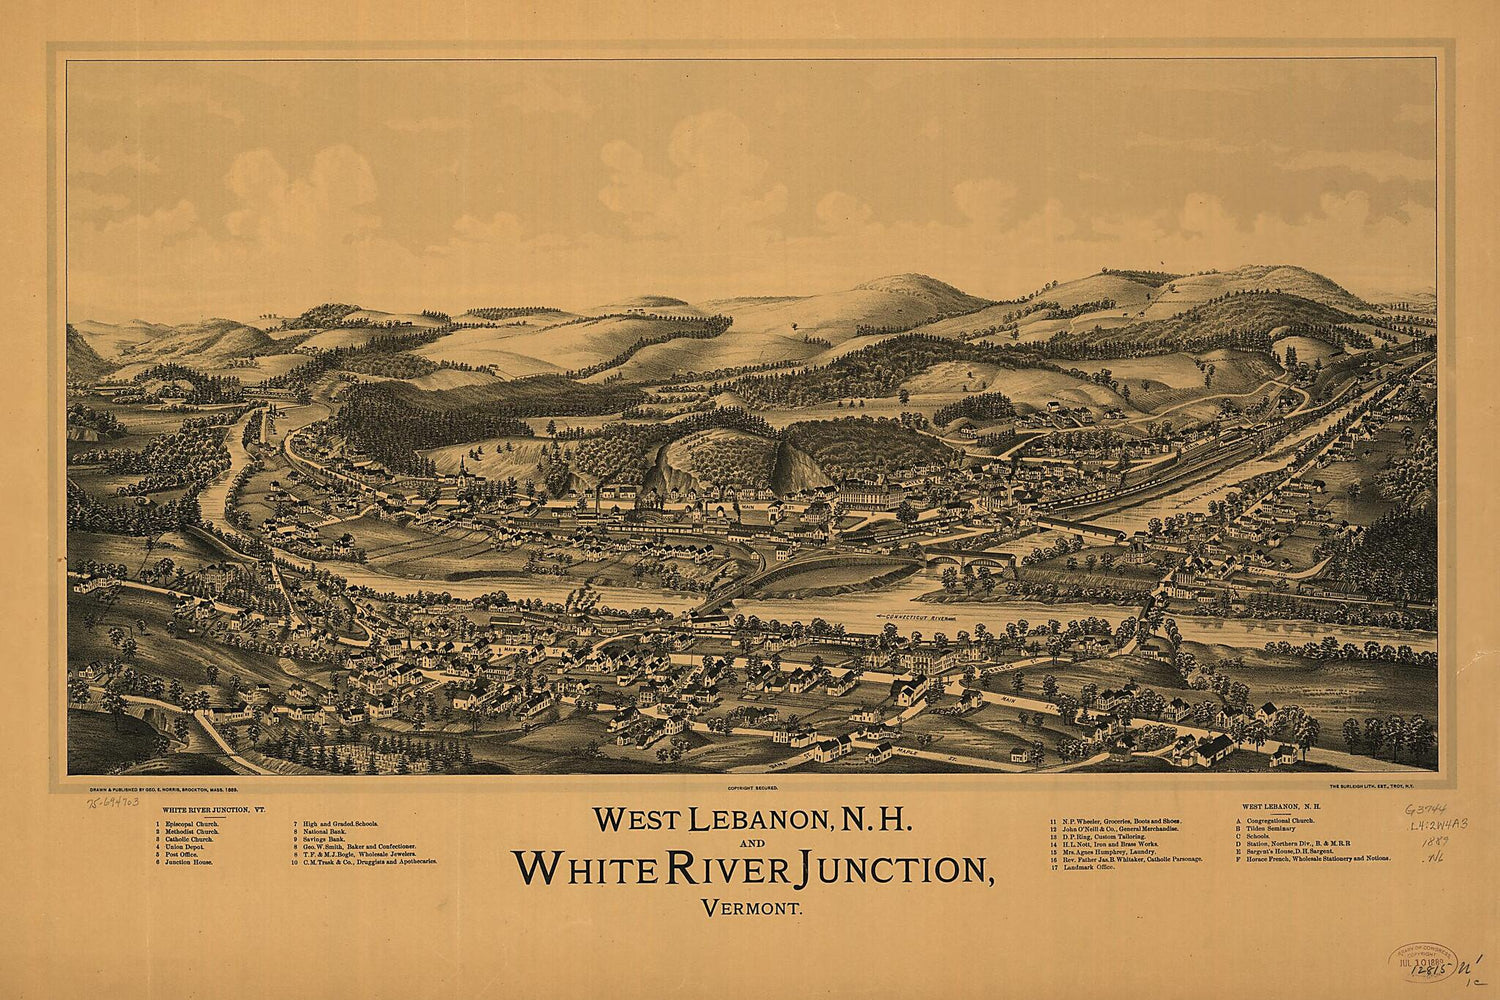 This old map of West Lebanon, New Hampshire, and White River Junction, Vermont from 1889 was created by  Burleigh Litho, George E. Norris in 1889